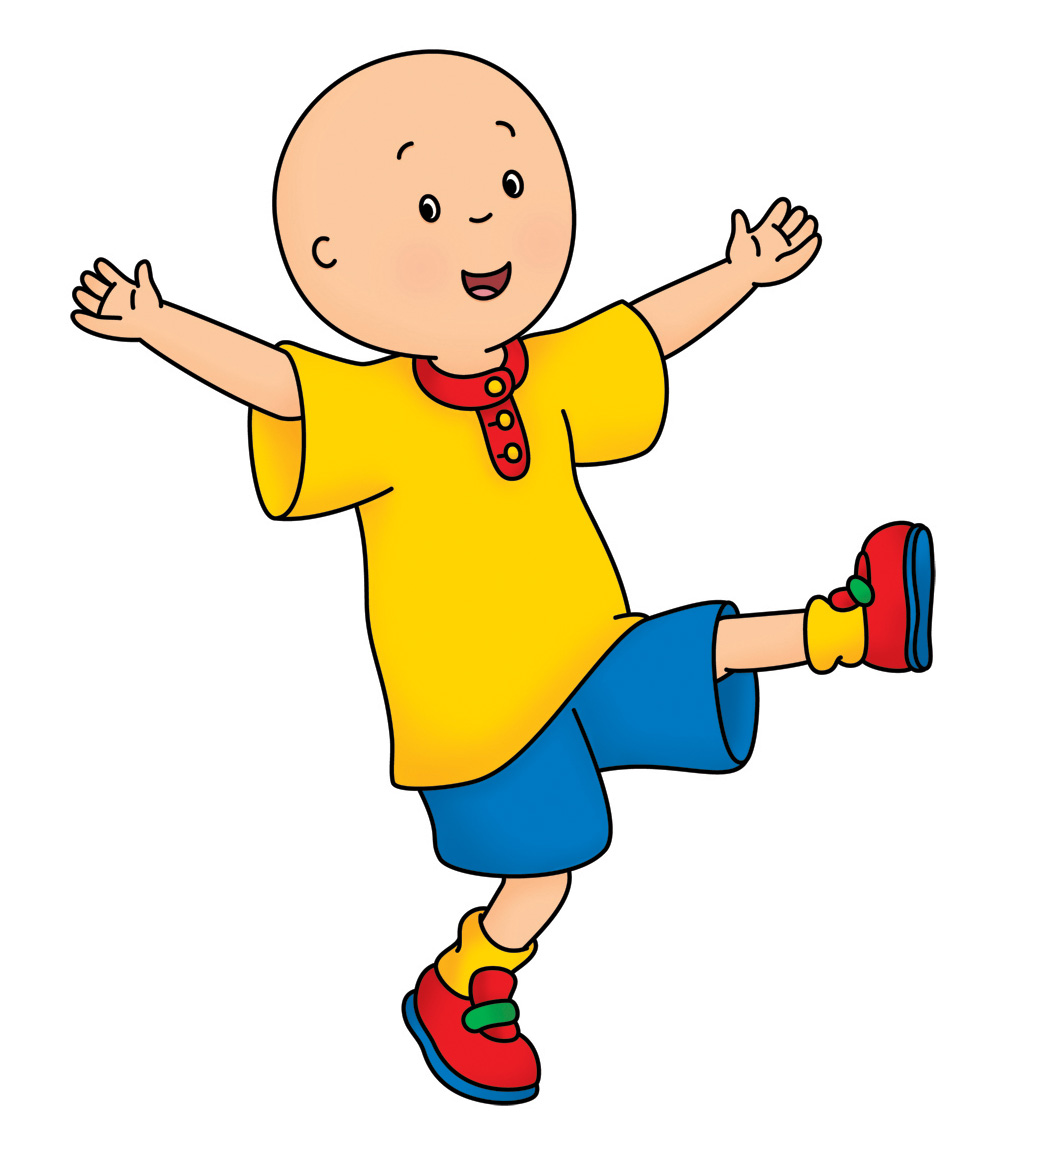 http://img3.wikia.nocookie.net/__cb20121117103015/caillou/images/c/c7/Caillou-xl-pictures-12.jpg